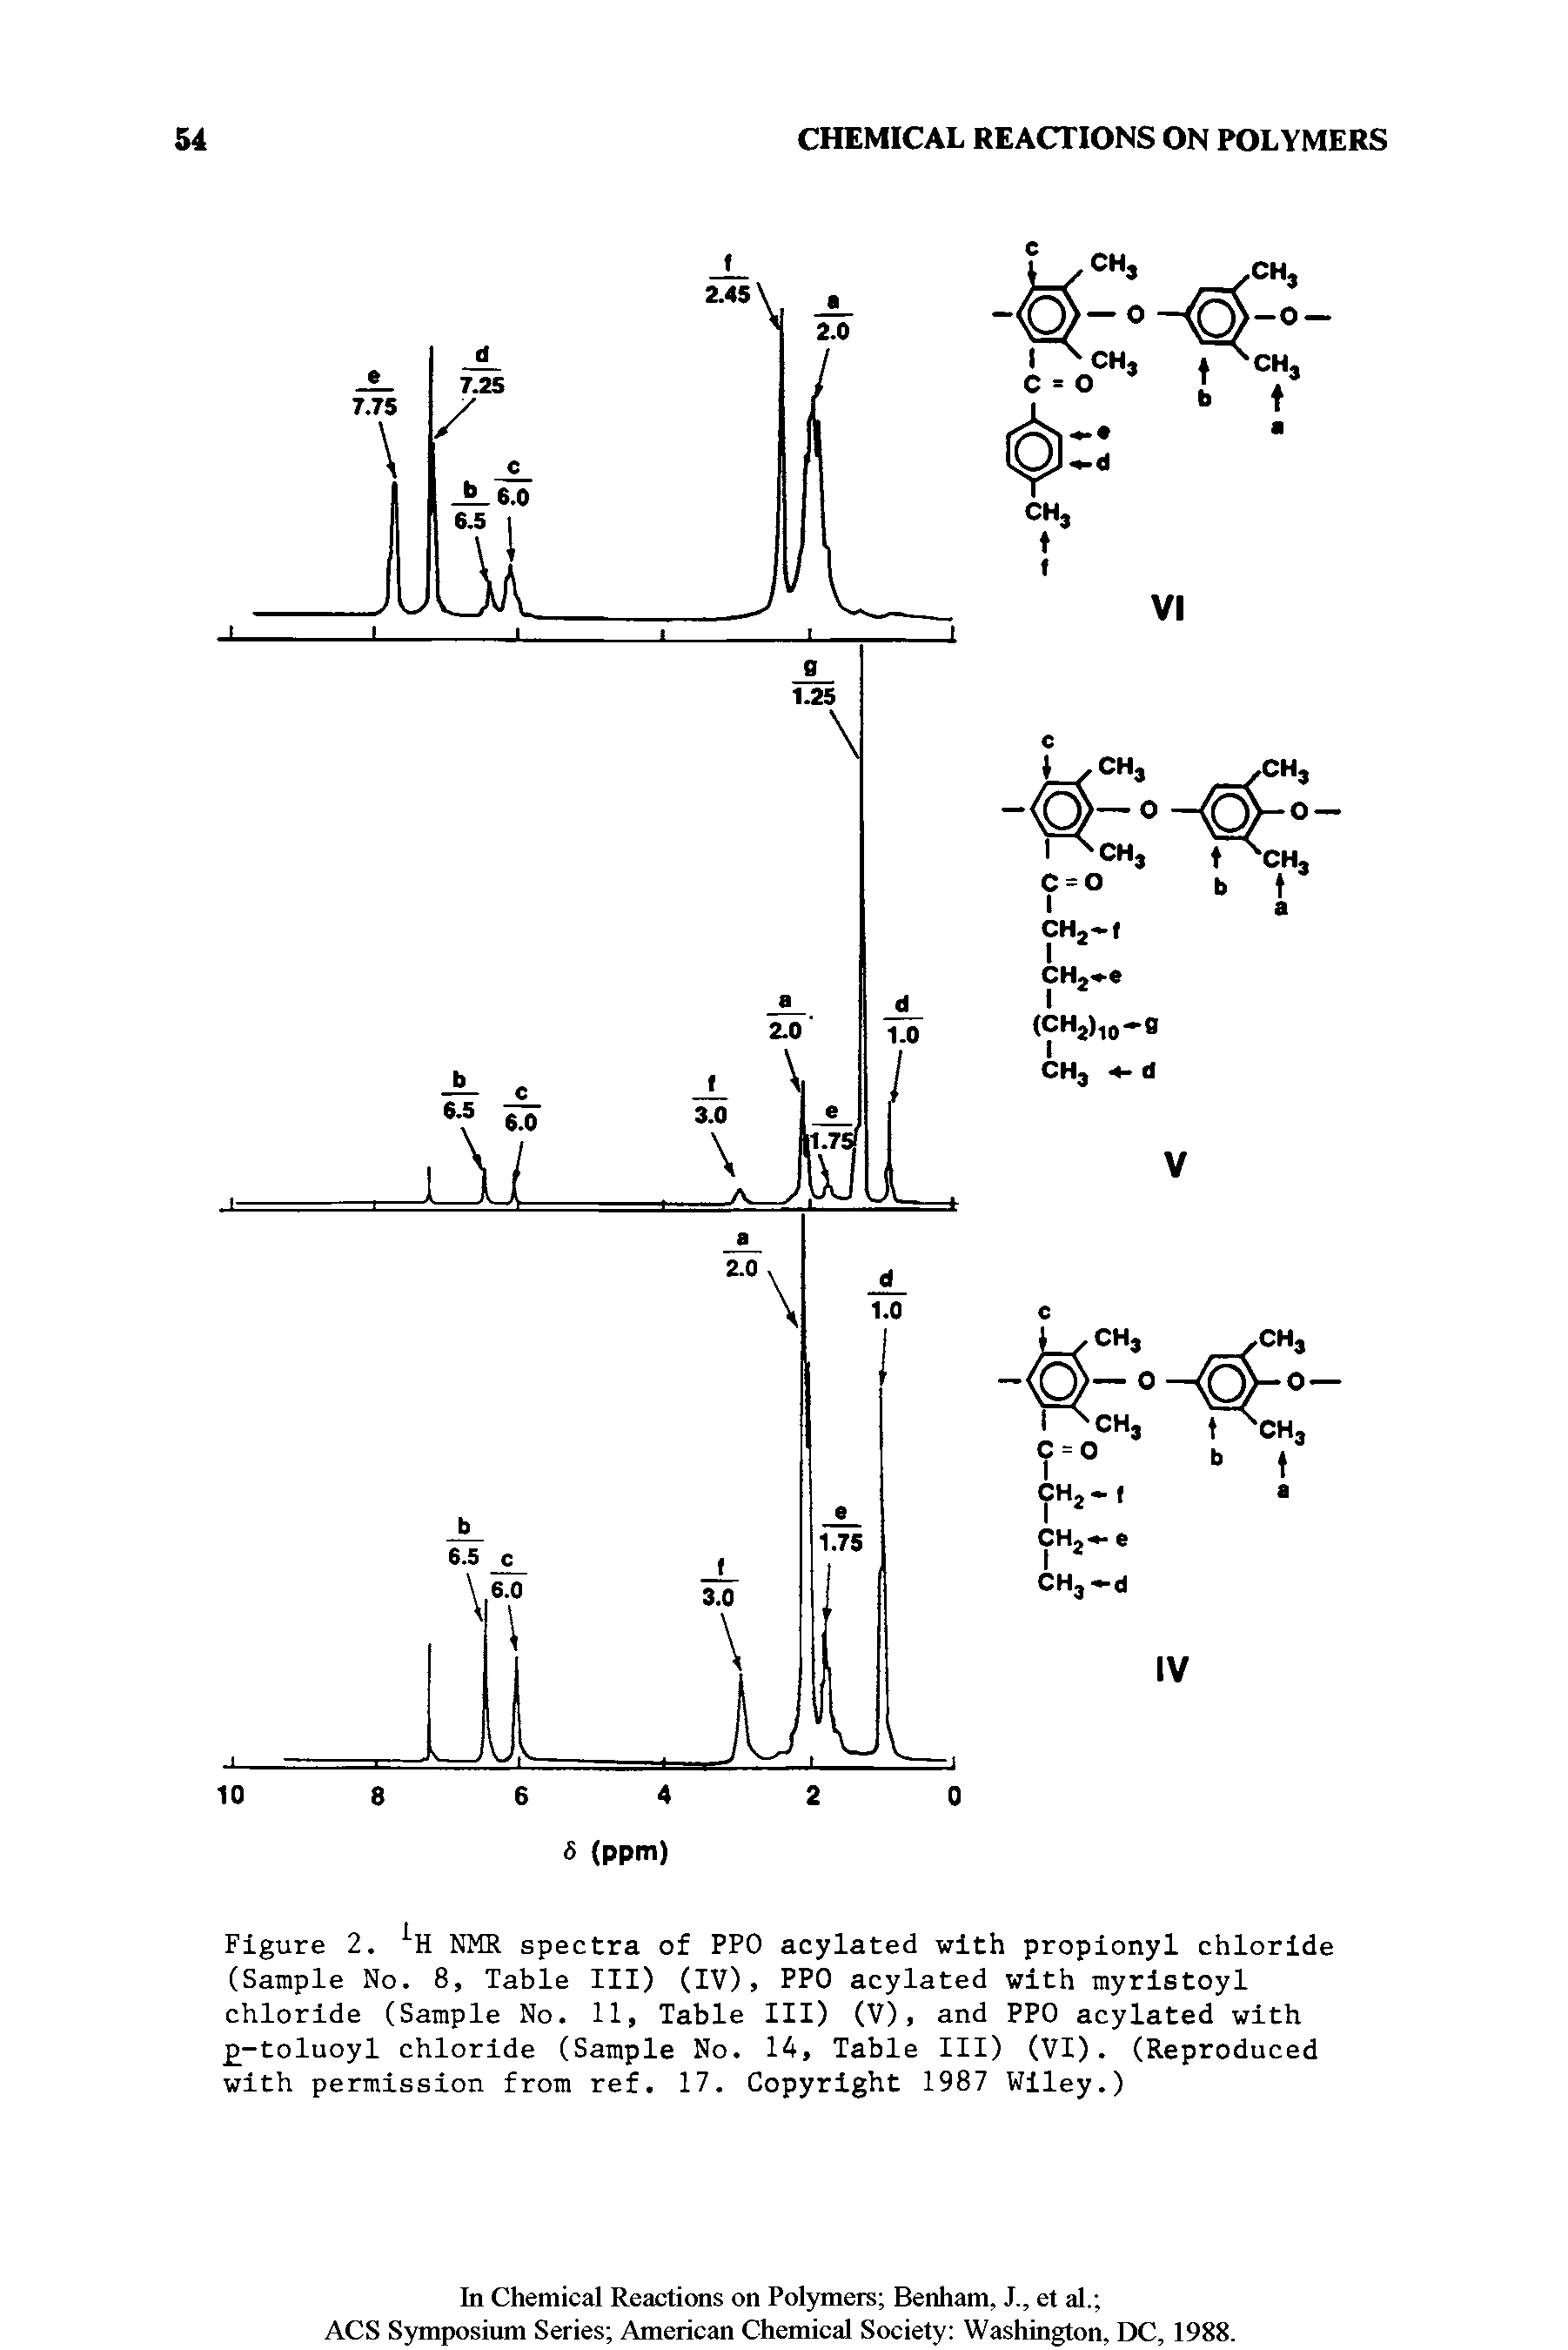 Figure 2. NMR spectra of PPO acylated with propionyl chloride (Sample No. 8, Table III) (IV), PPO acylated with myristoyl chloride (Sample No. 11, Table III) (V), and PPO acylated with -toluoyl chloride (Sample No. 14, Table III) (VI). (Reproduced with permission from ref. 17. Copyright 1987 Wiley.)...